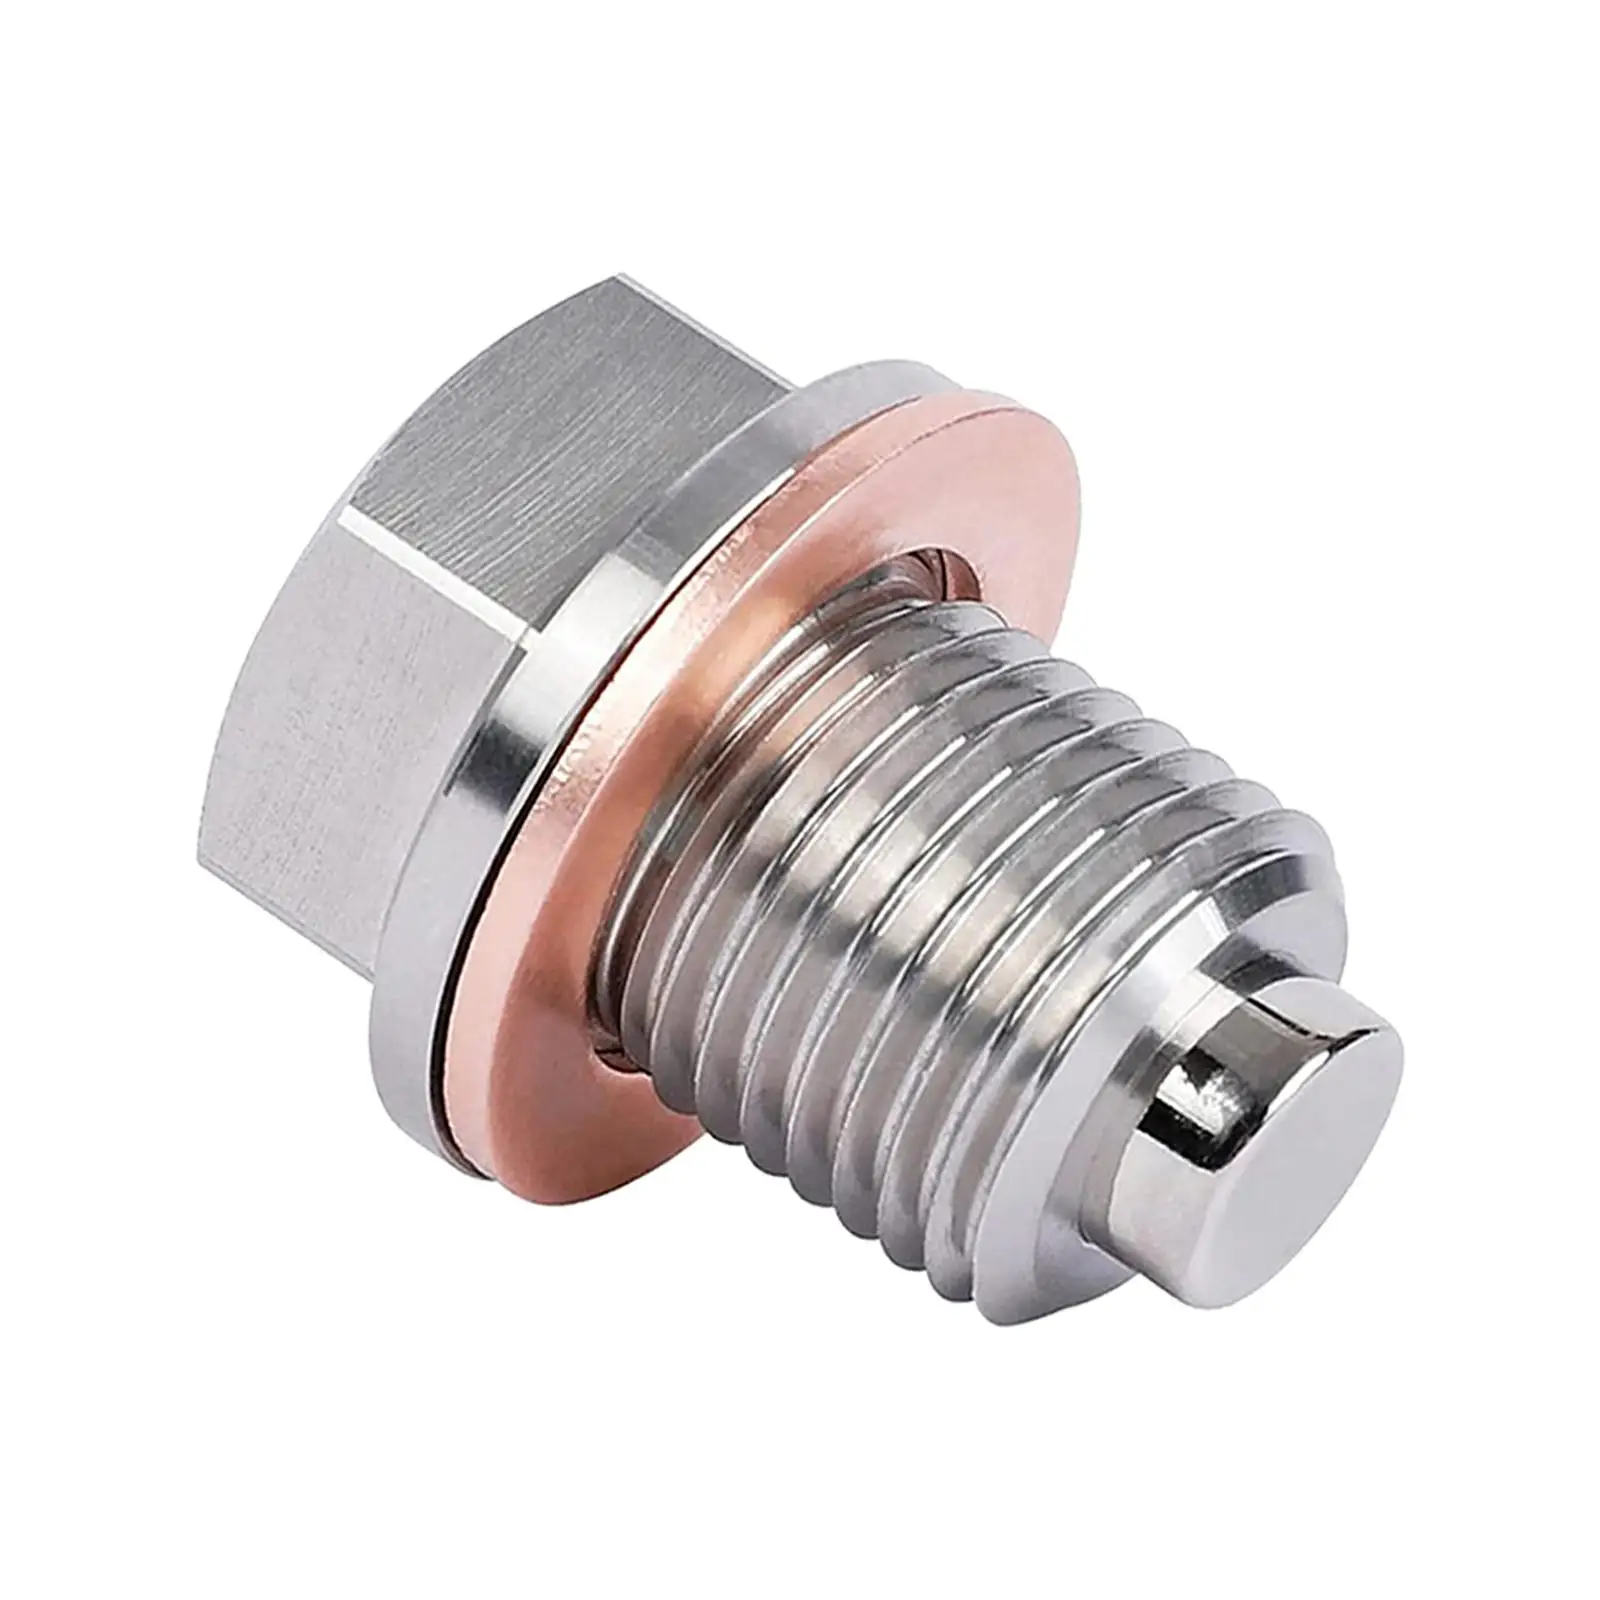 Oil Drain Plug Screw M14x1.5 Heavy Duty Easy to Install Replacement Anti Leak Engine Oil Pan Protection Plug for Car